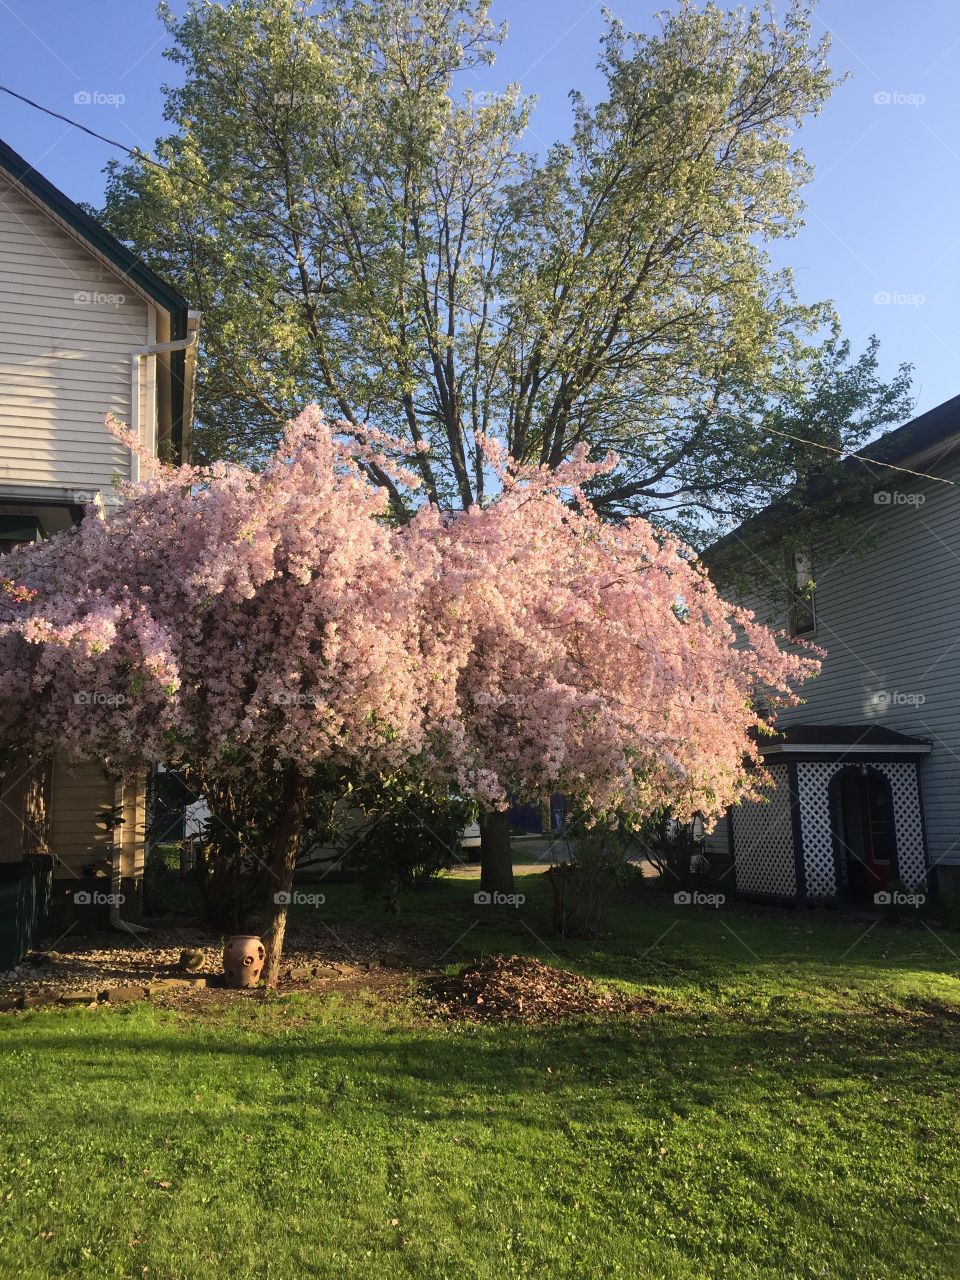 Nature beauty. Weeping cherry tree full at bloom. Pretty in pink with its soft petals